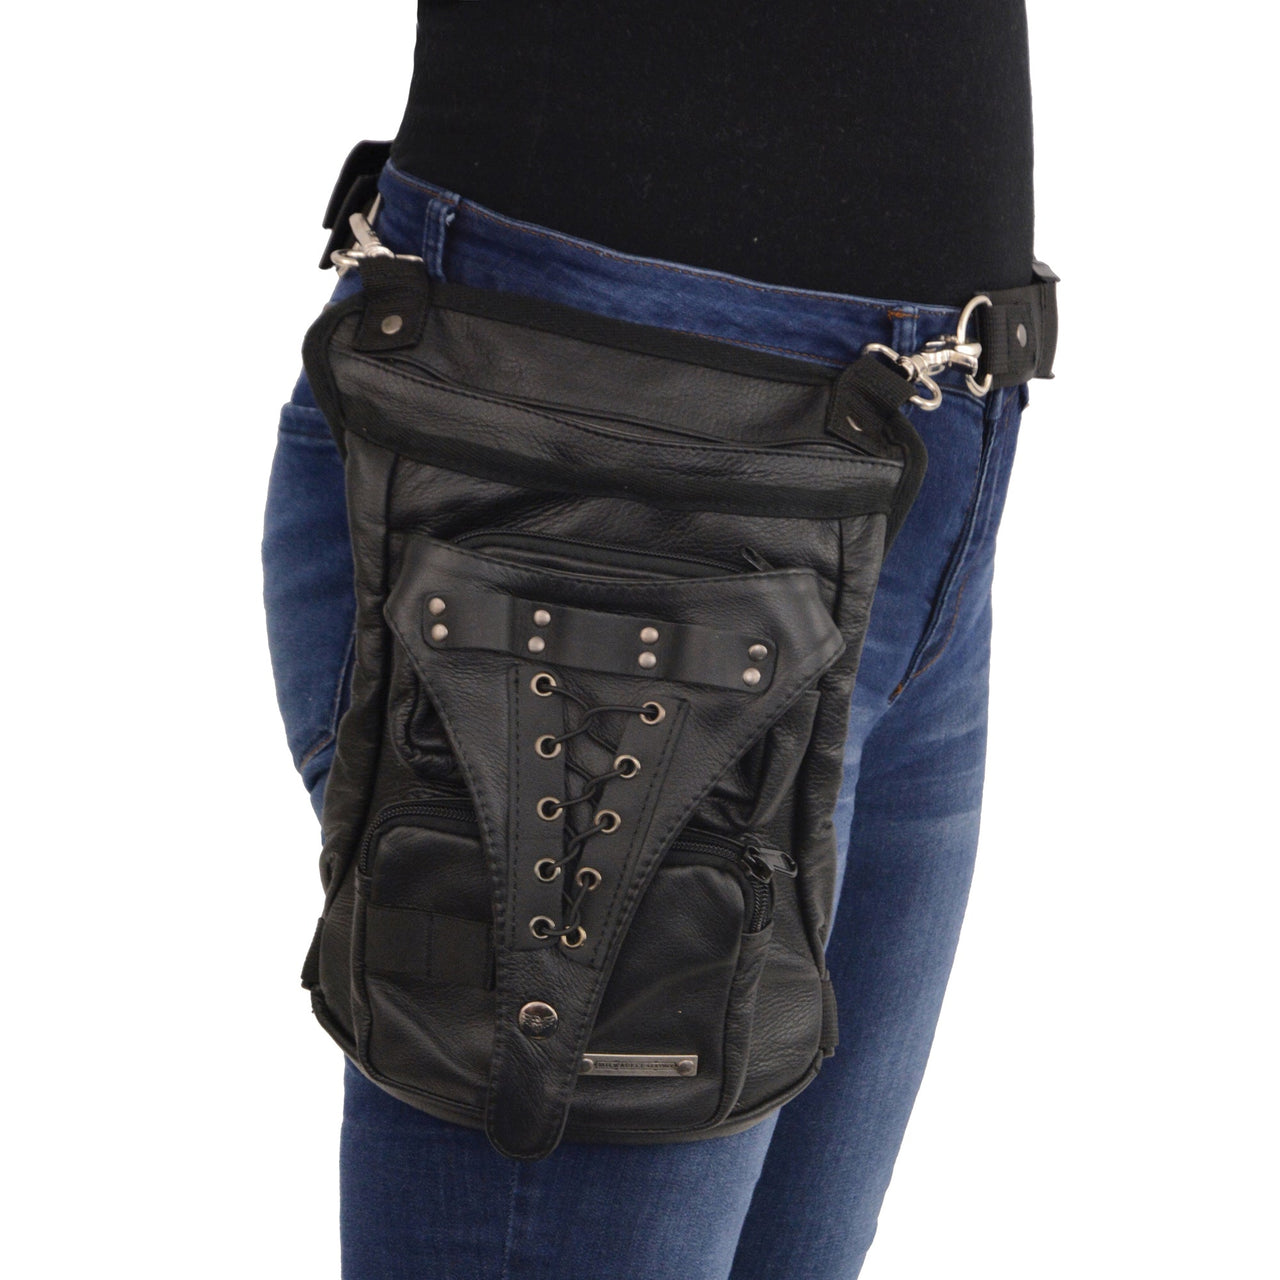 Conceal & Carry Black Leather Thigh Bag w/ Waist Belt - HighwayLeather